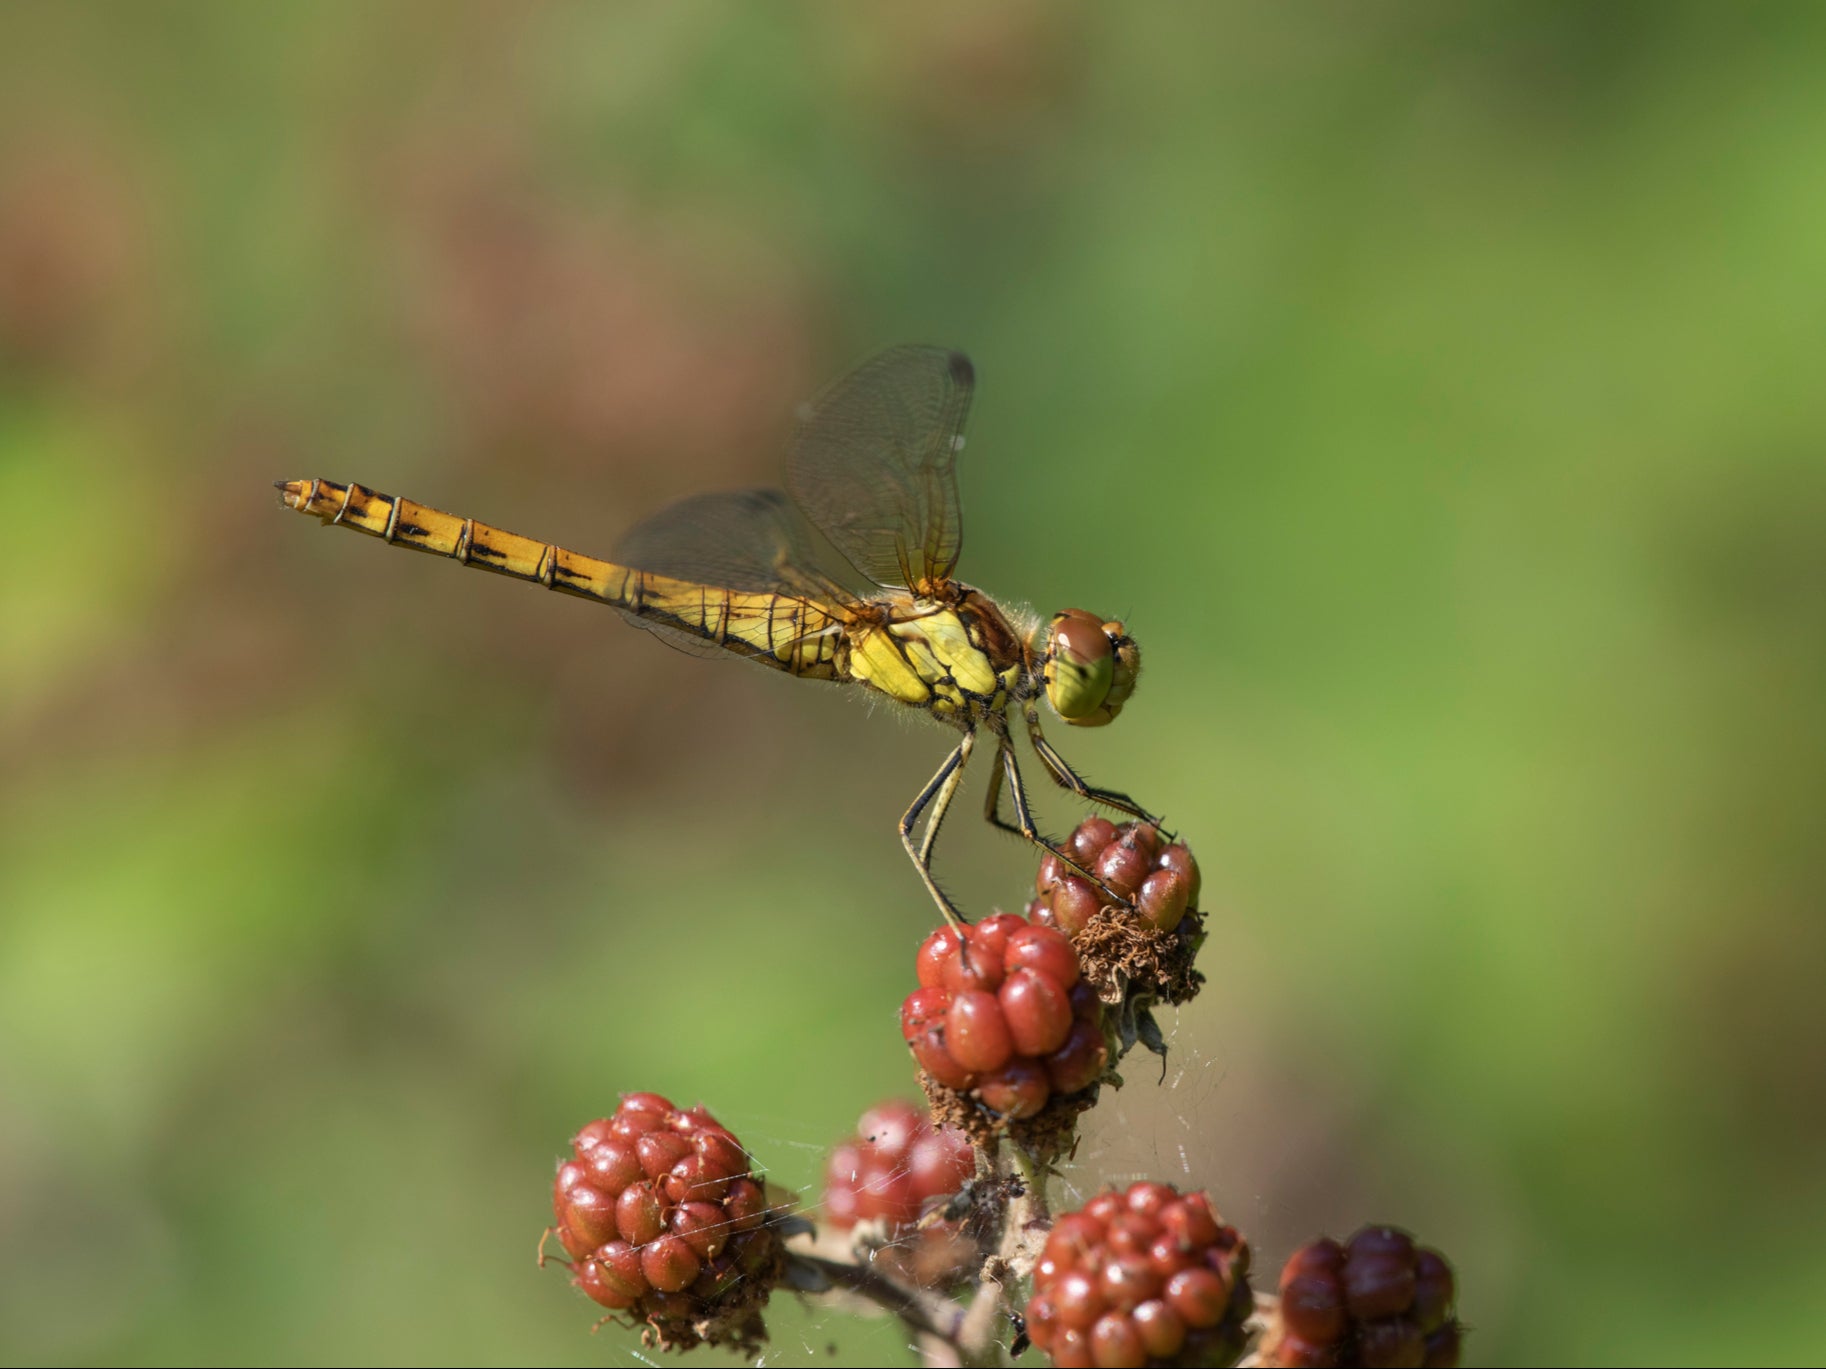 A common darter dragonfly. Why roll when you can somersault?